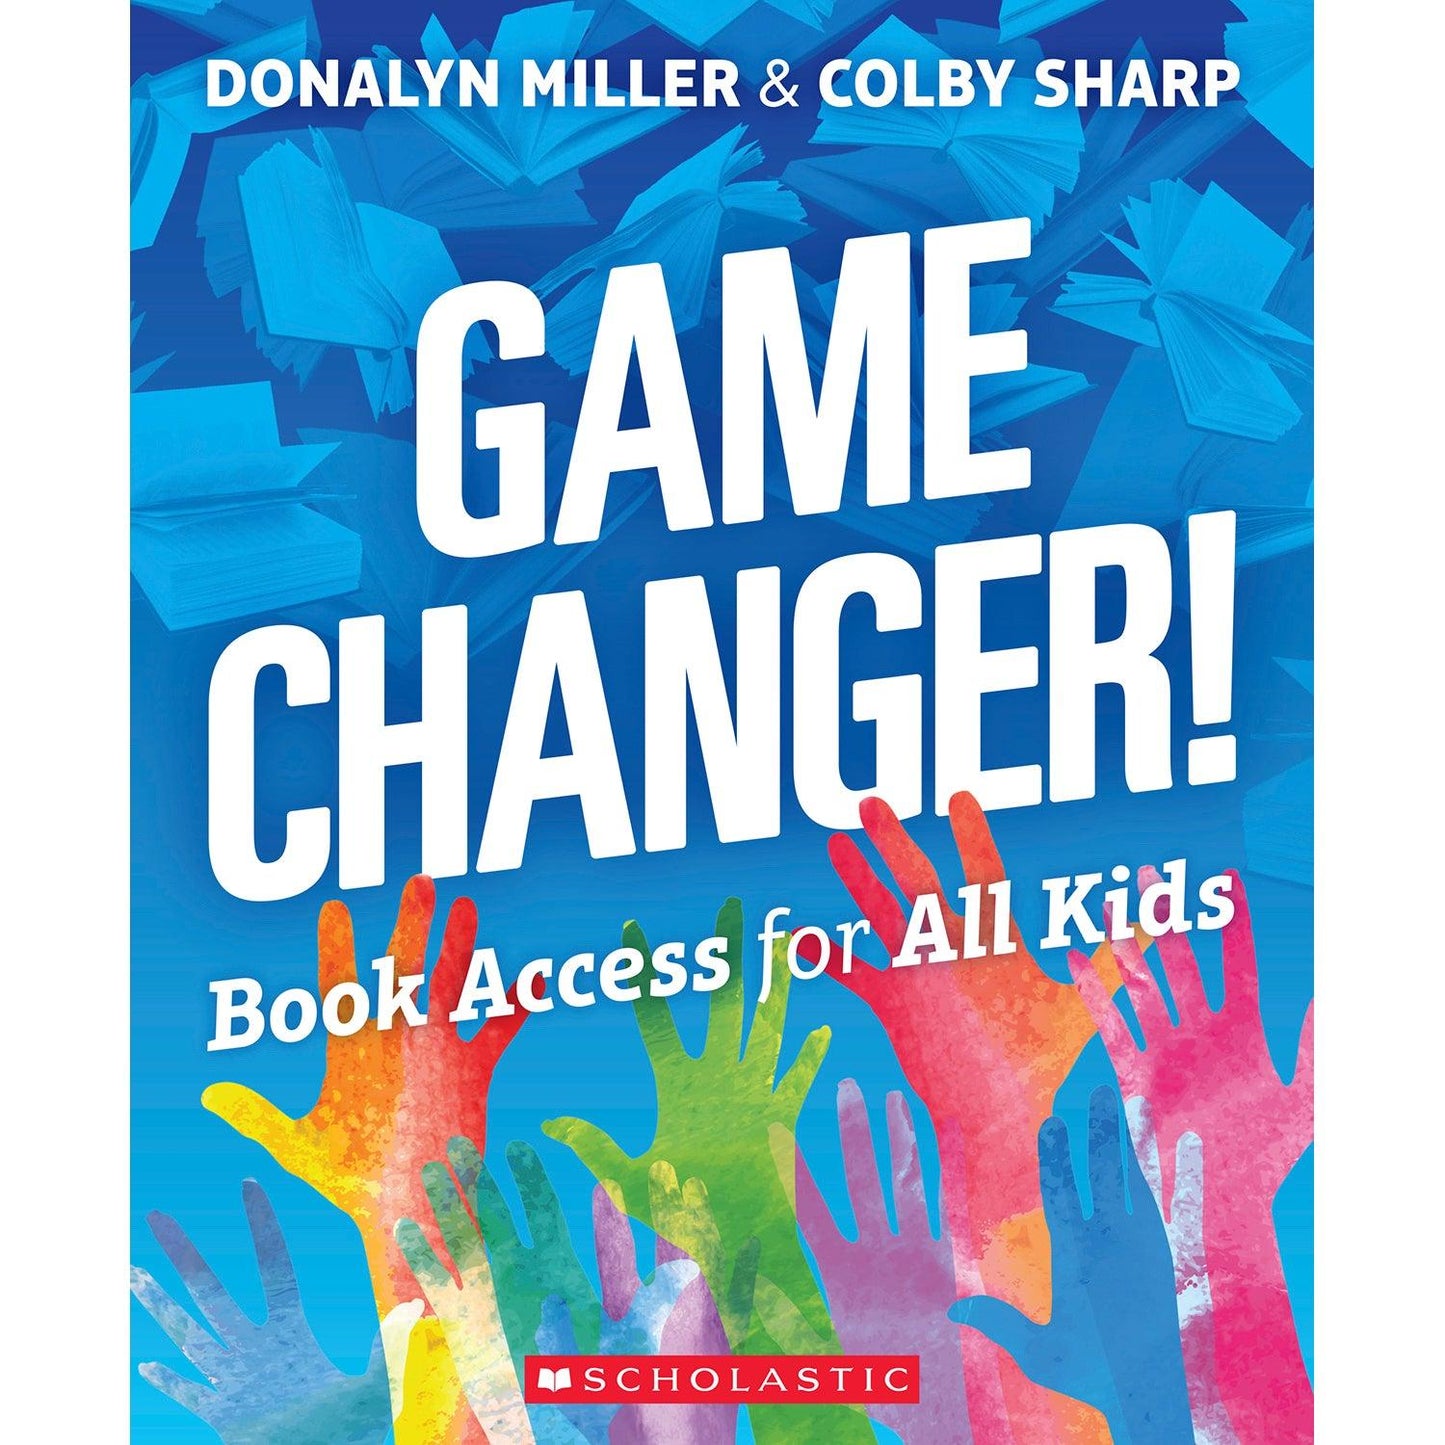 Game Changer! Book Access for All Kids - Loomini